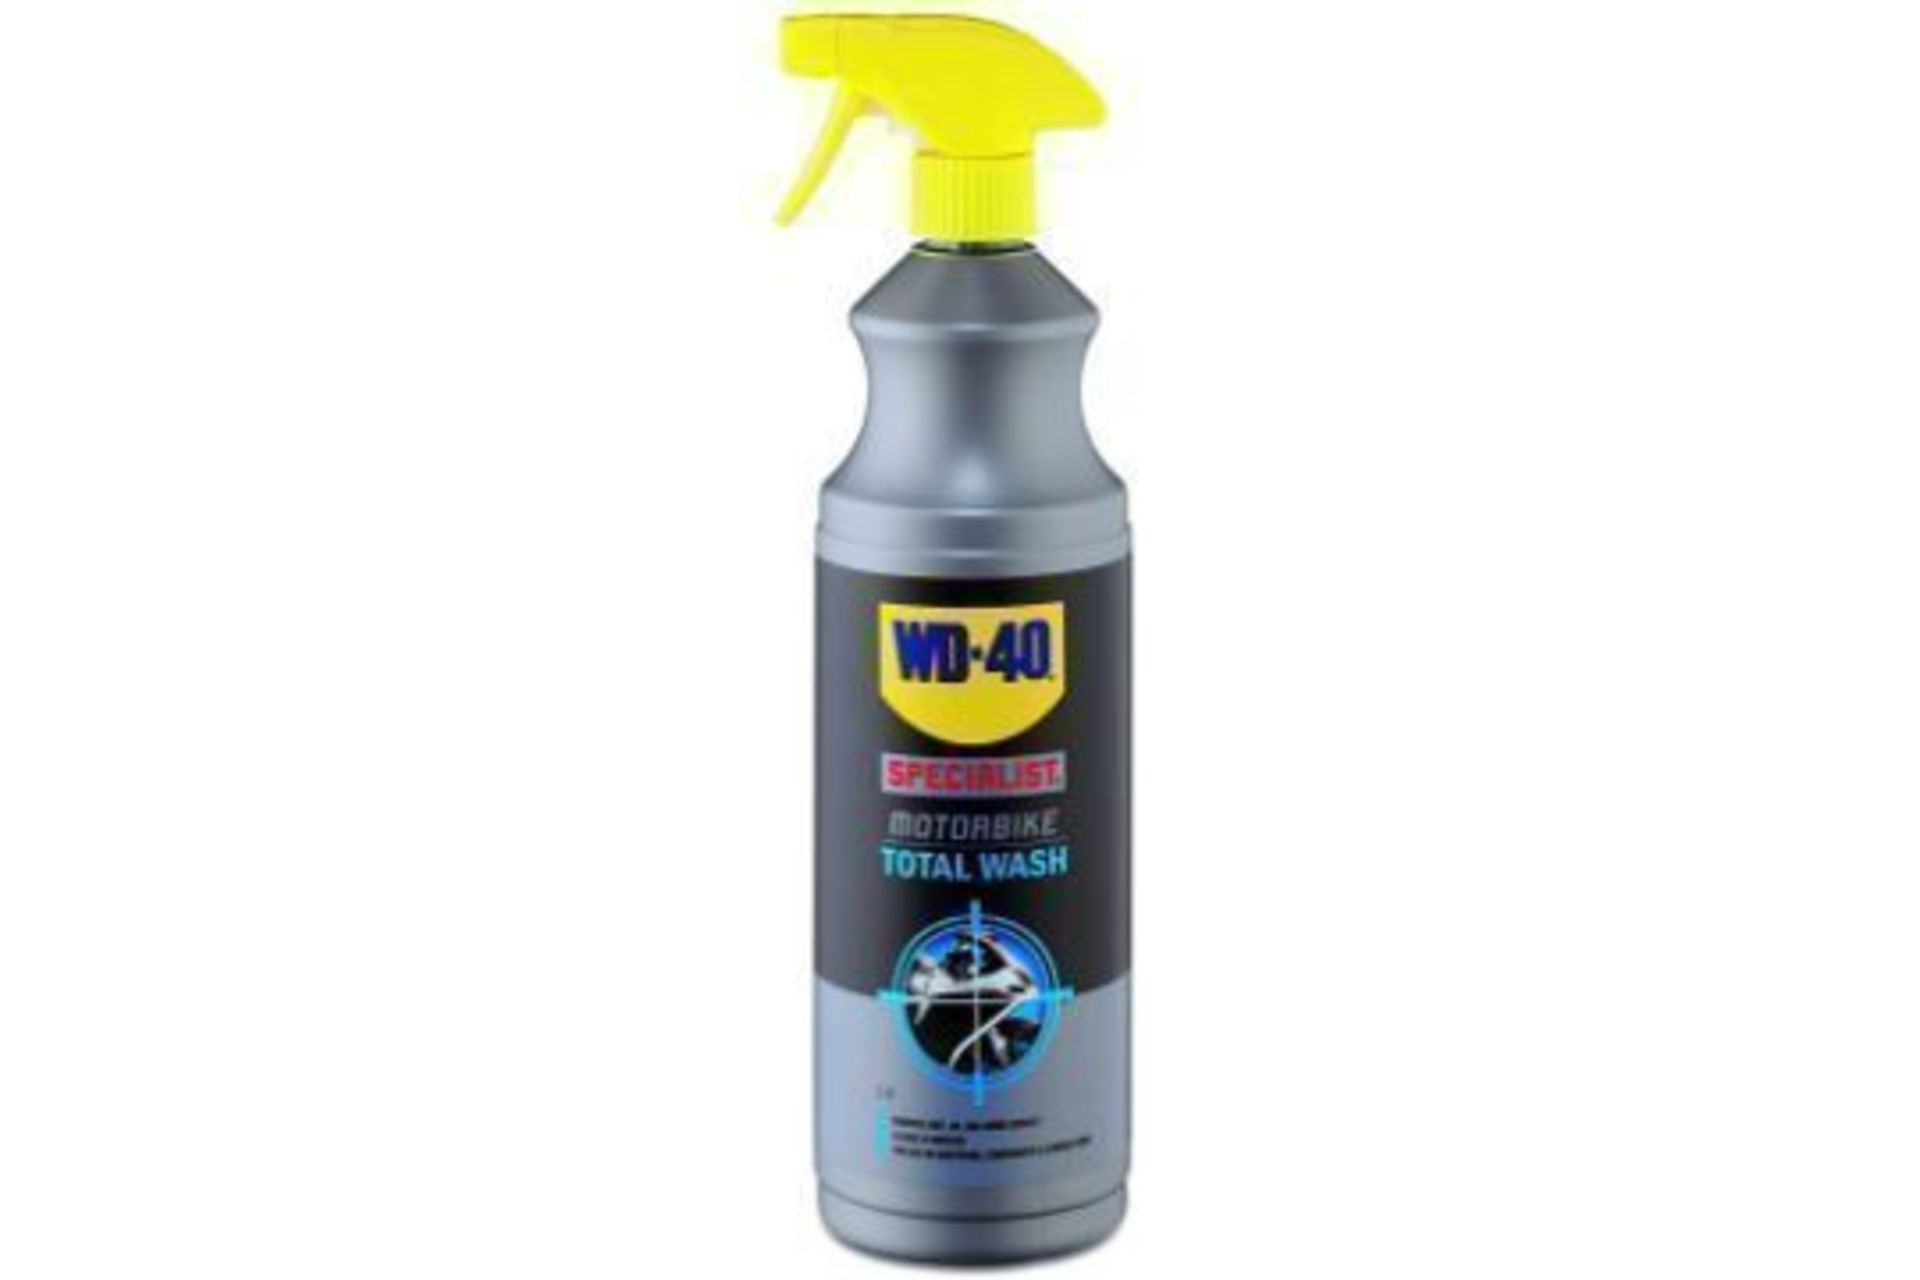 BRAND NEW 1L BOTTLE OF WD-40 MOTORBIKE TOTAL WASH - RRP £7.99.